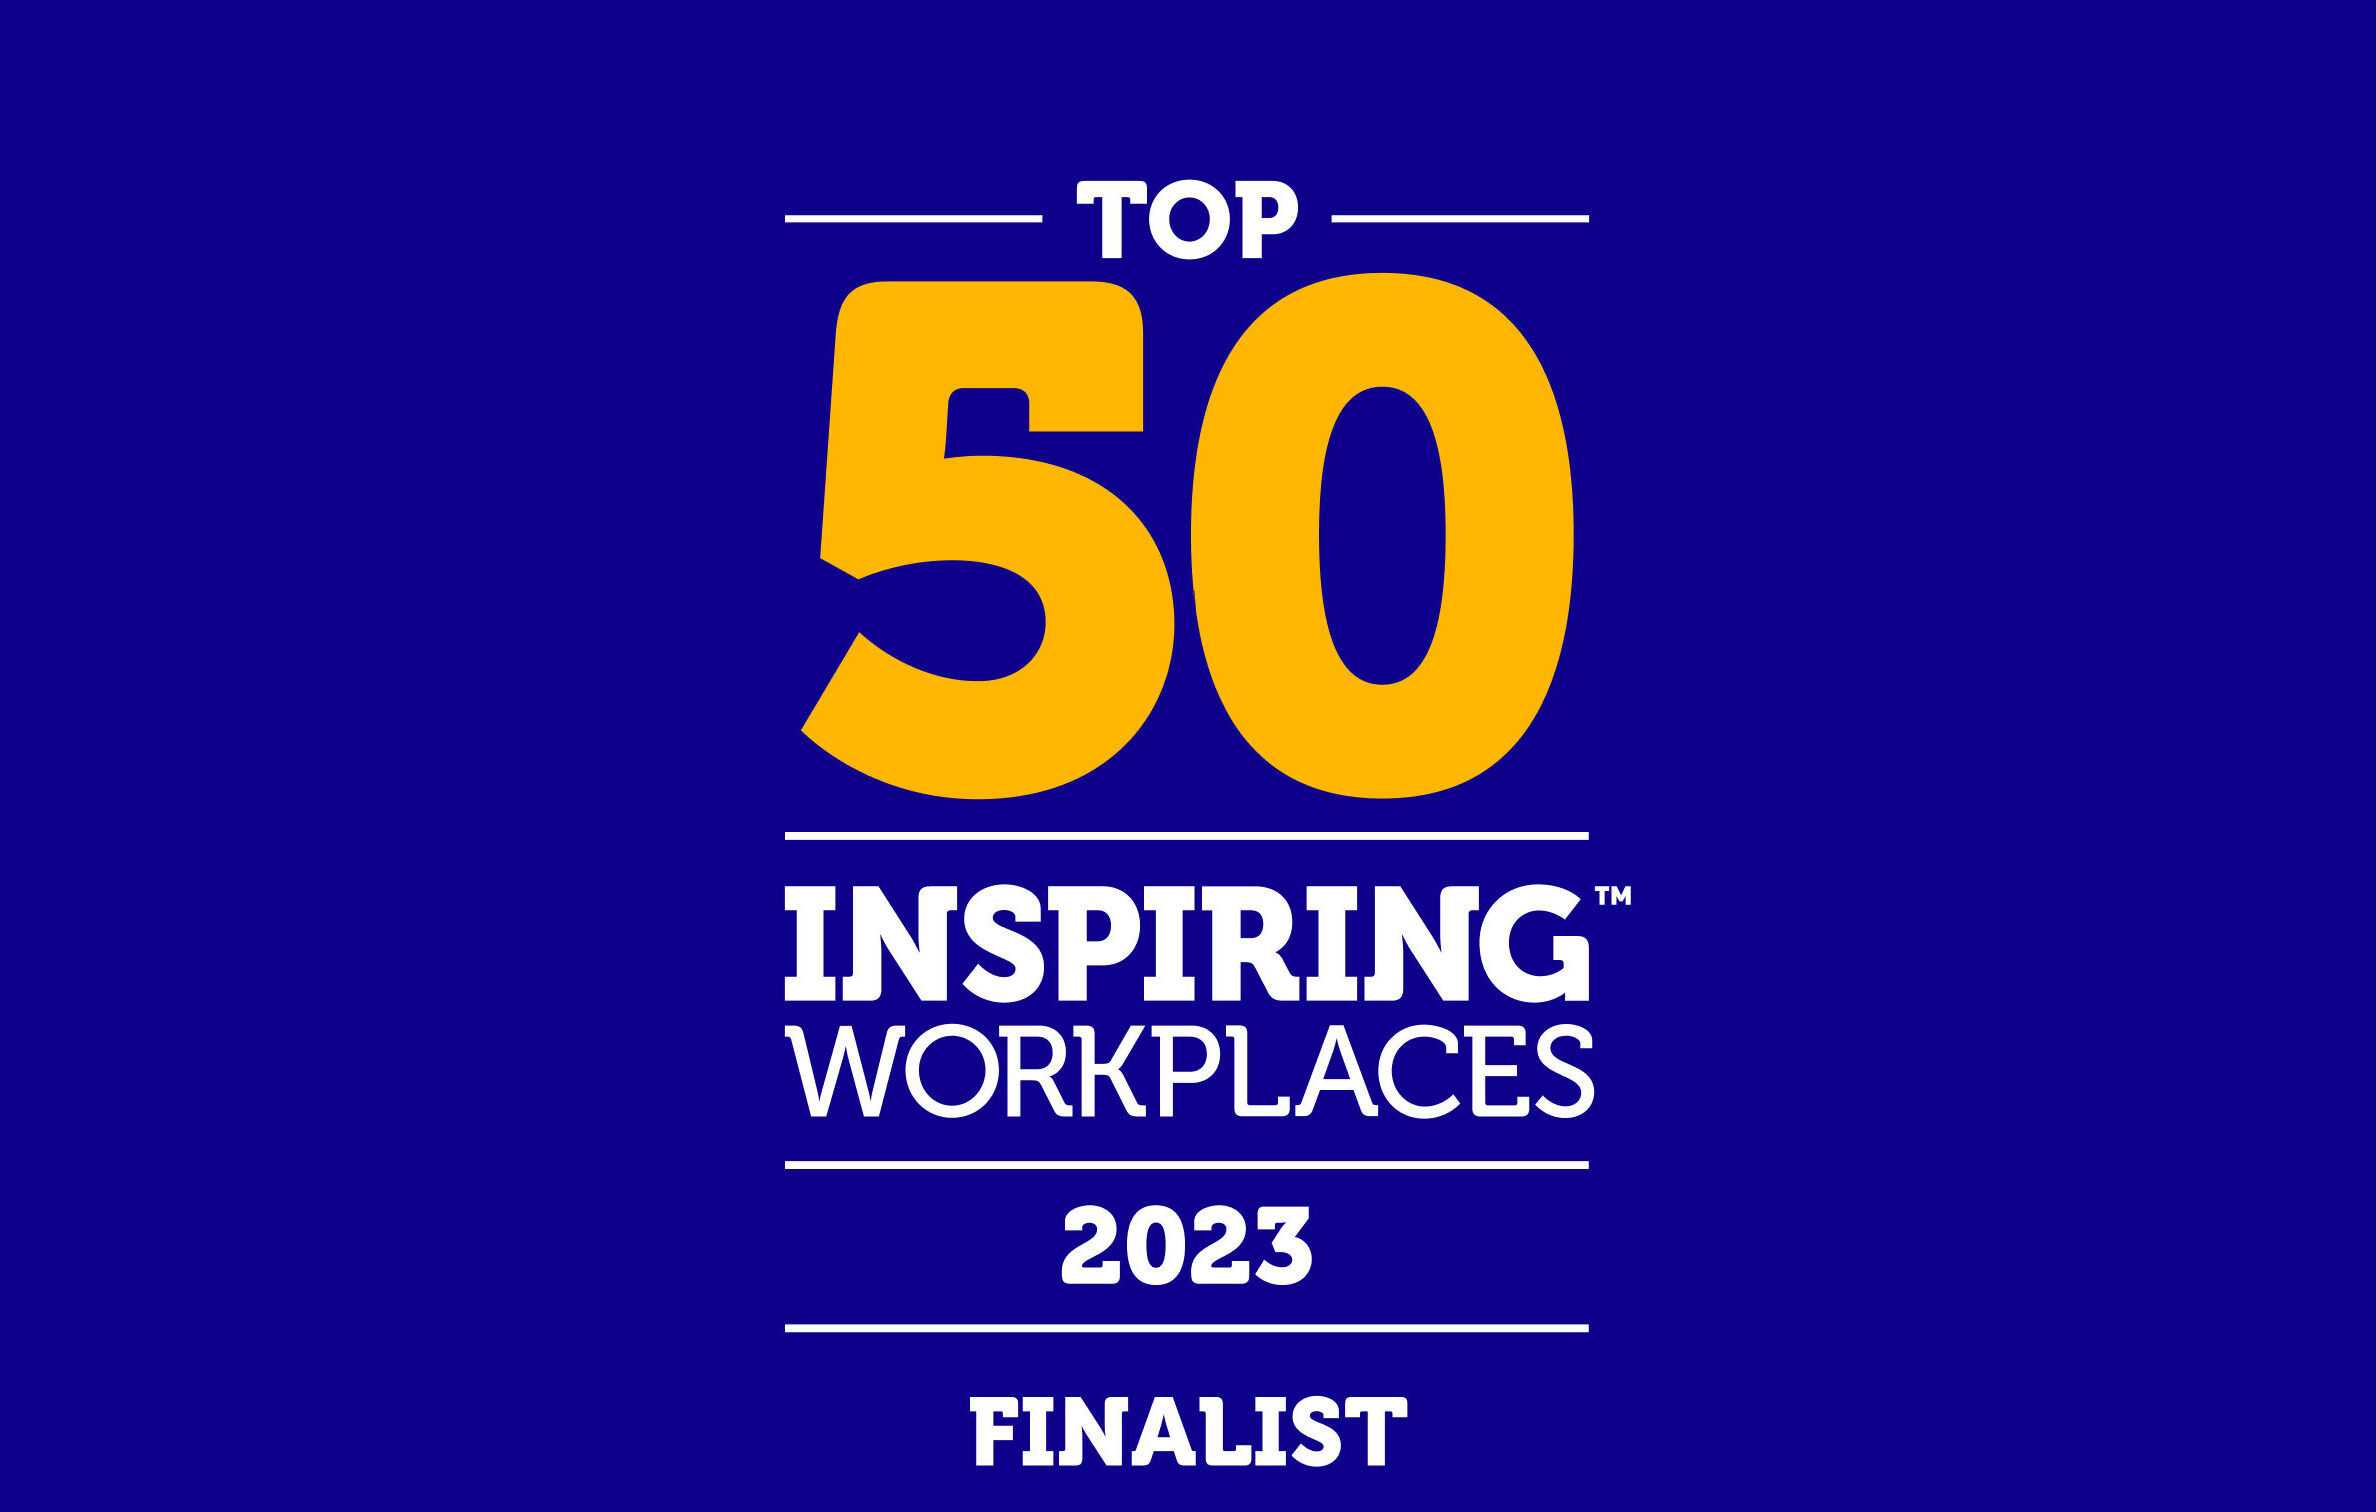 2023 Inspiring Workplaces Awards finalists for EMEA announced